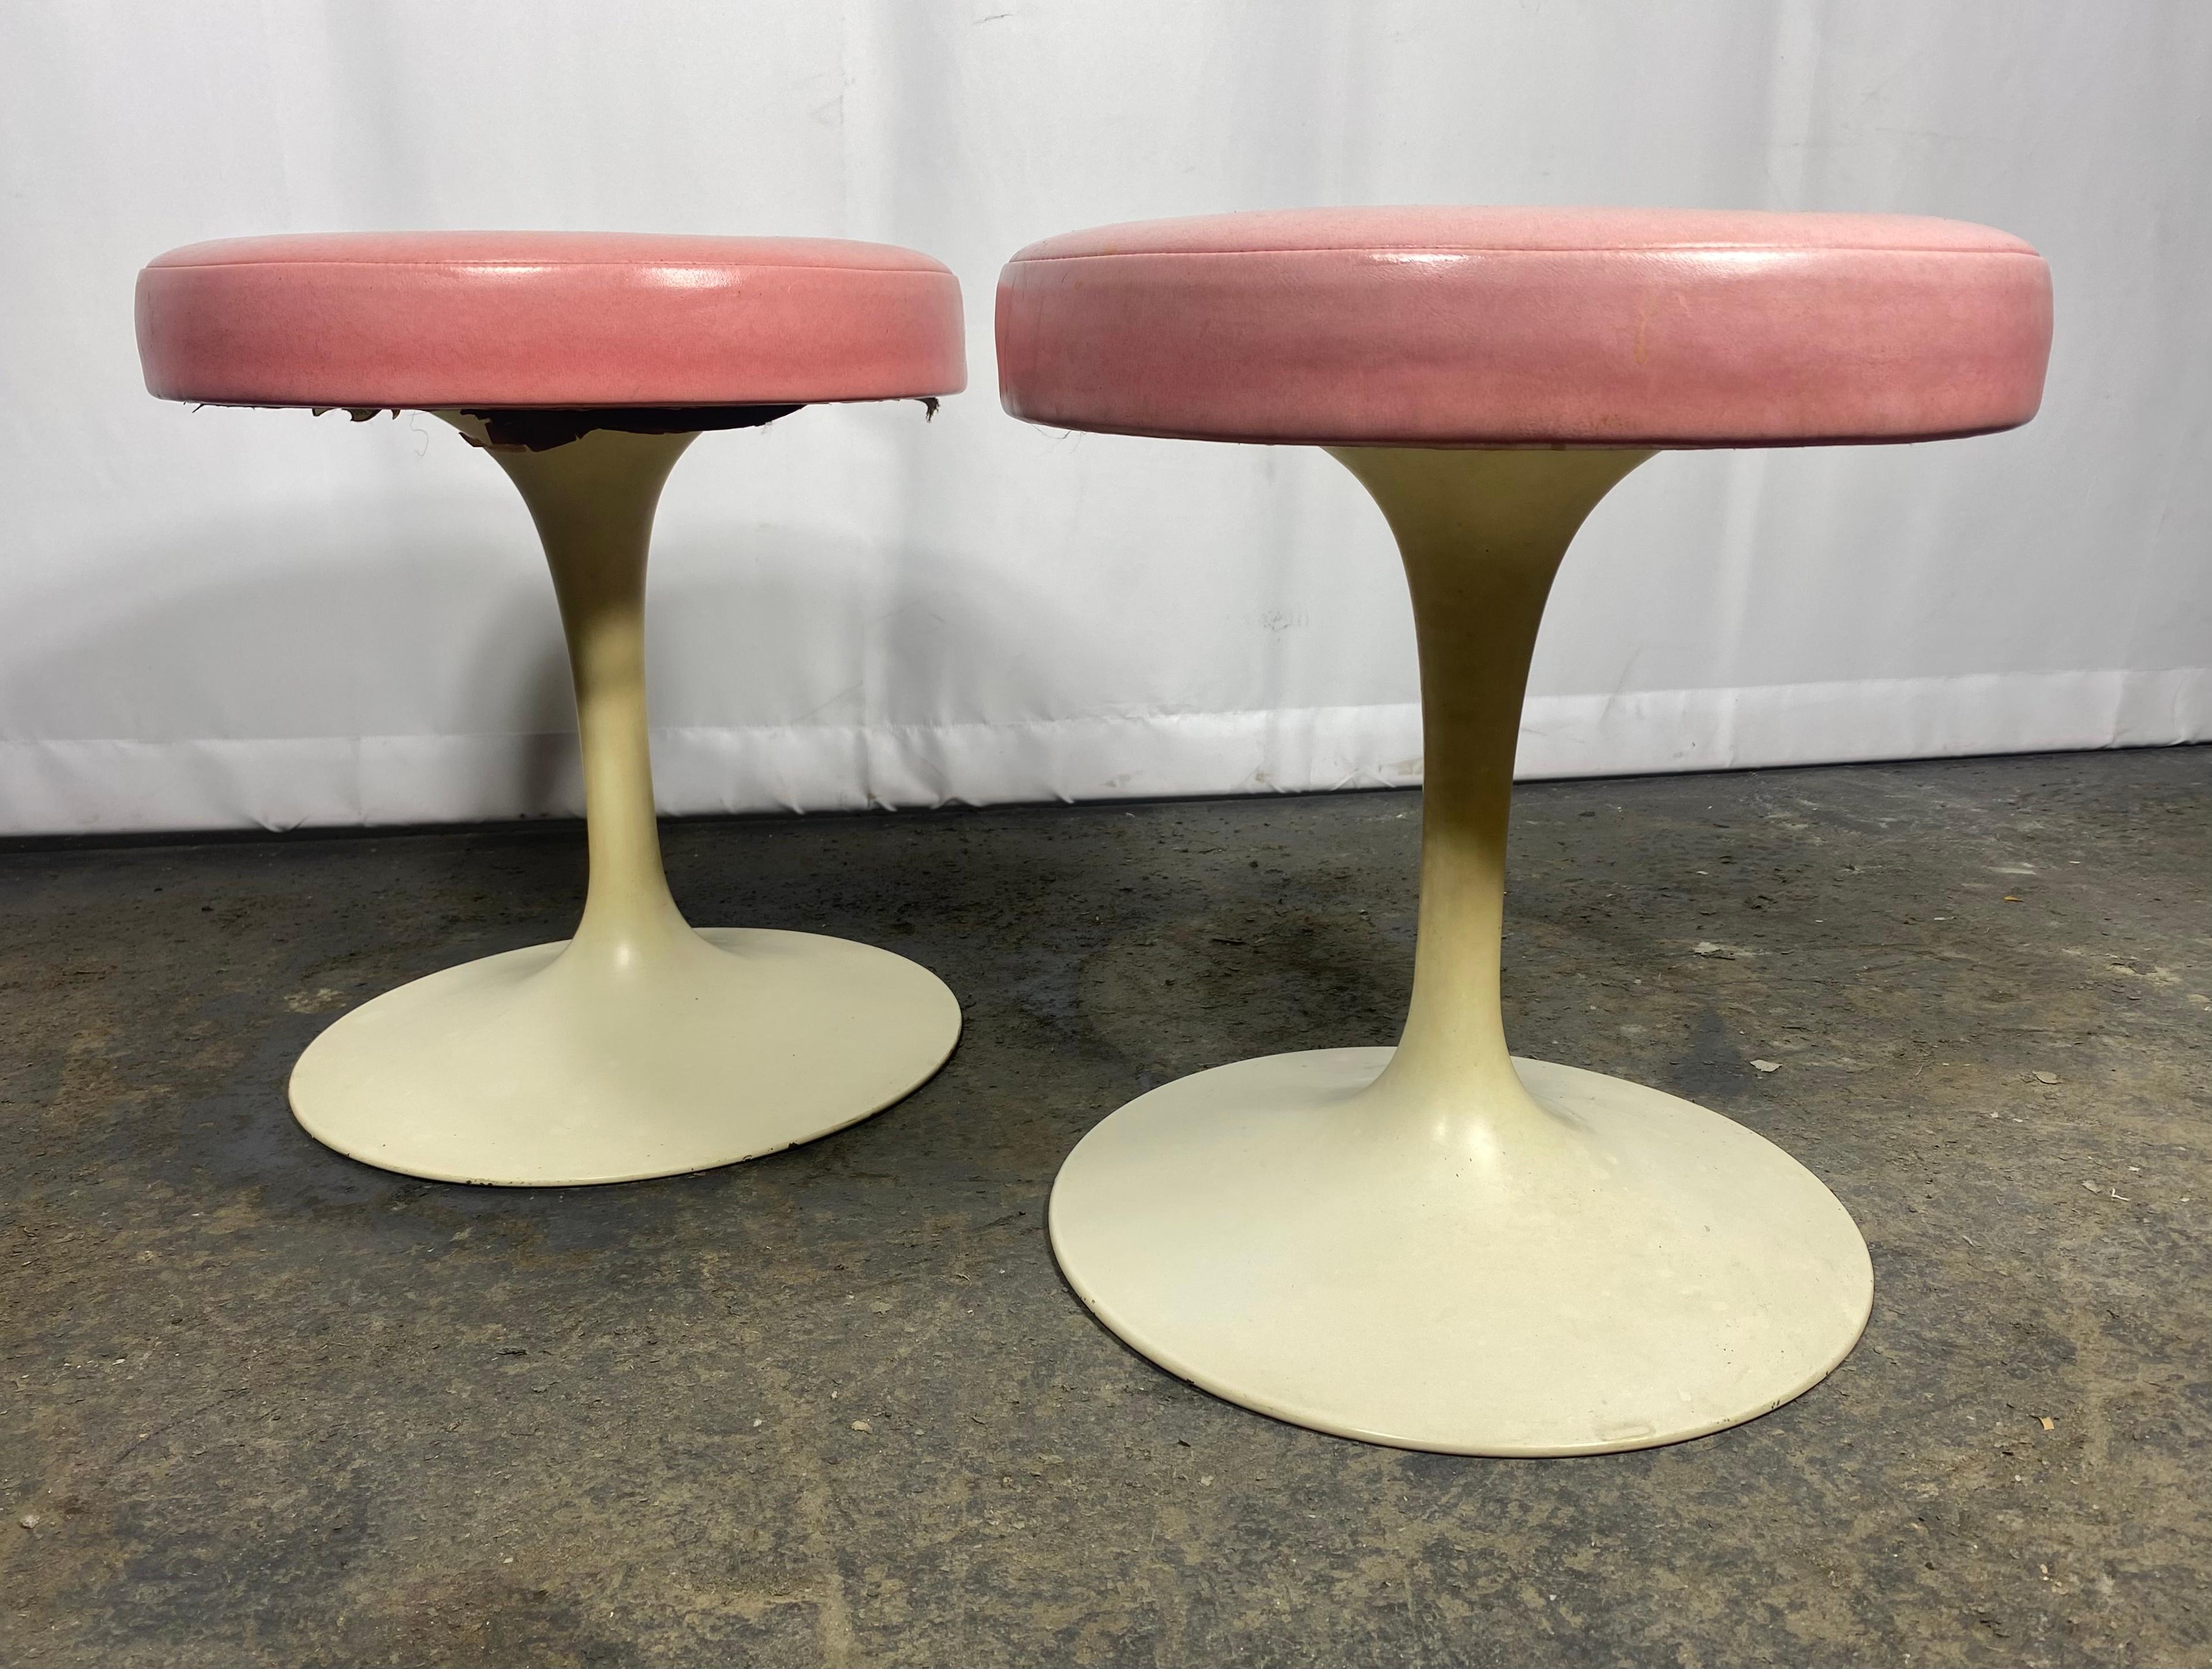 Early Pair of Knoll Saarinen Swiveling Tulip Base Stools. Salmon Color Leather In Good Condition For Sale In Buffalo, NY